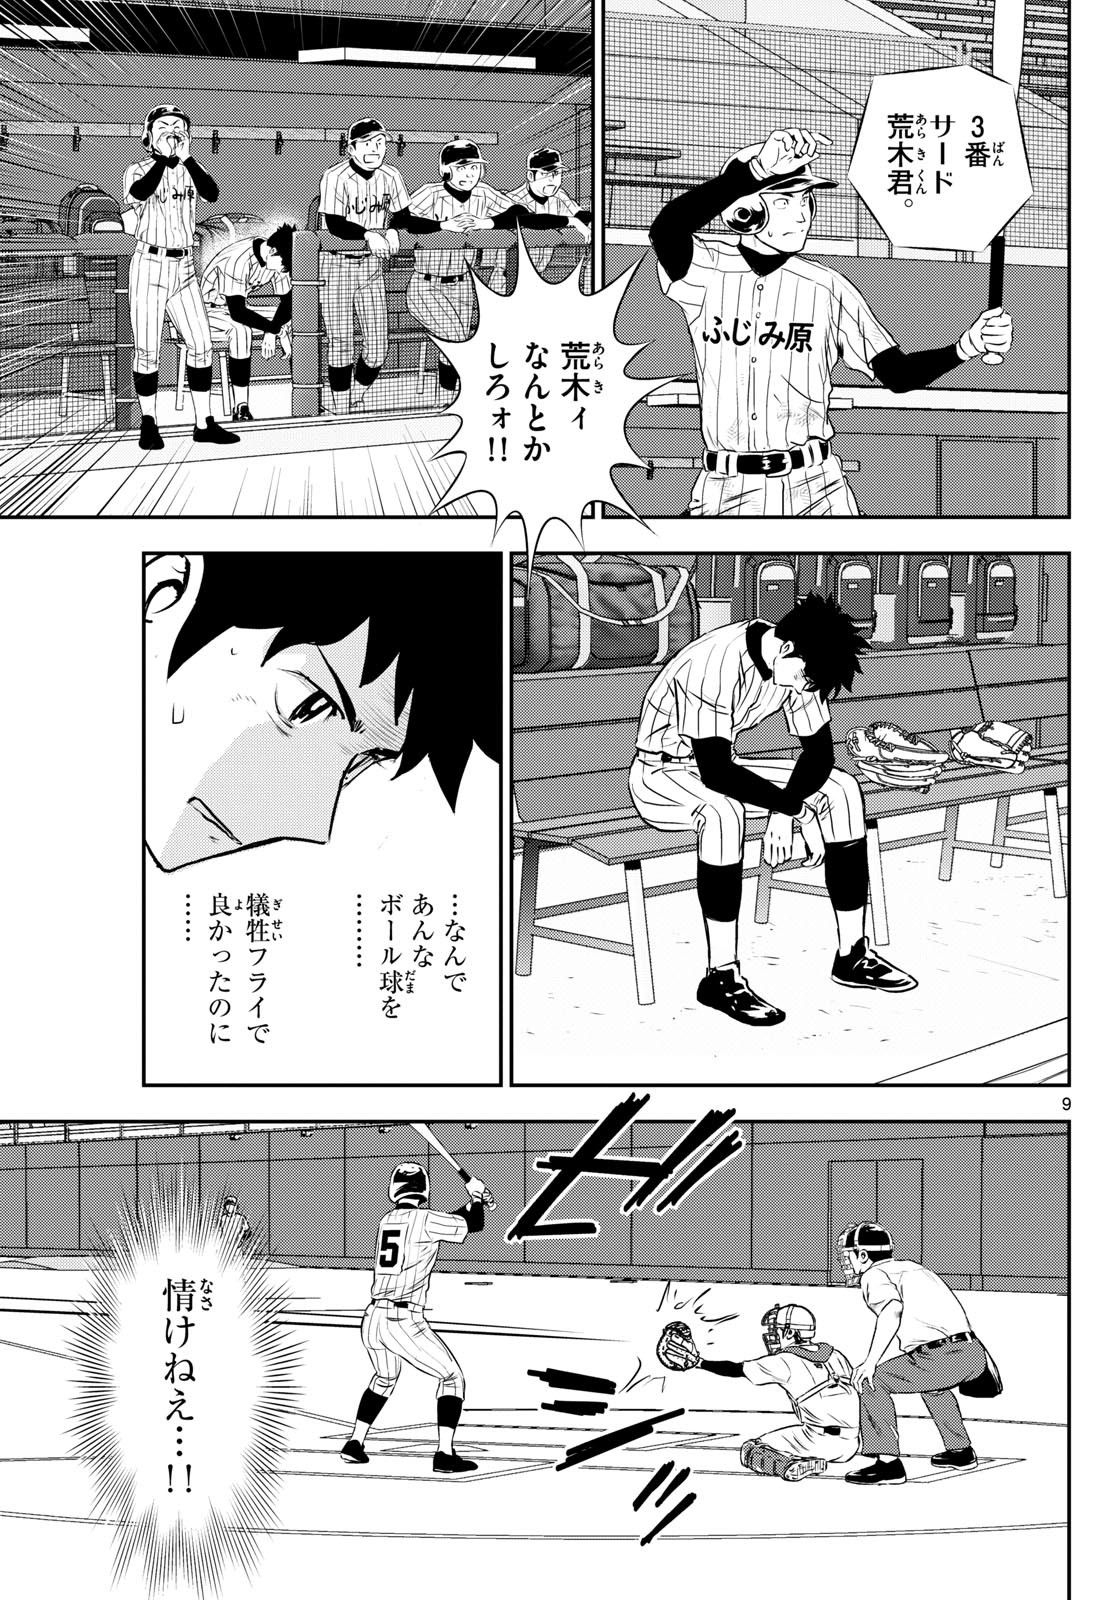 Major 2nd - メジャーセカンド - Chapter 273 - Page 9